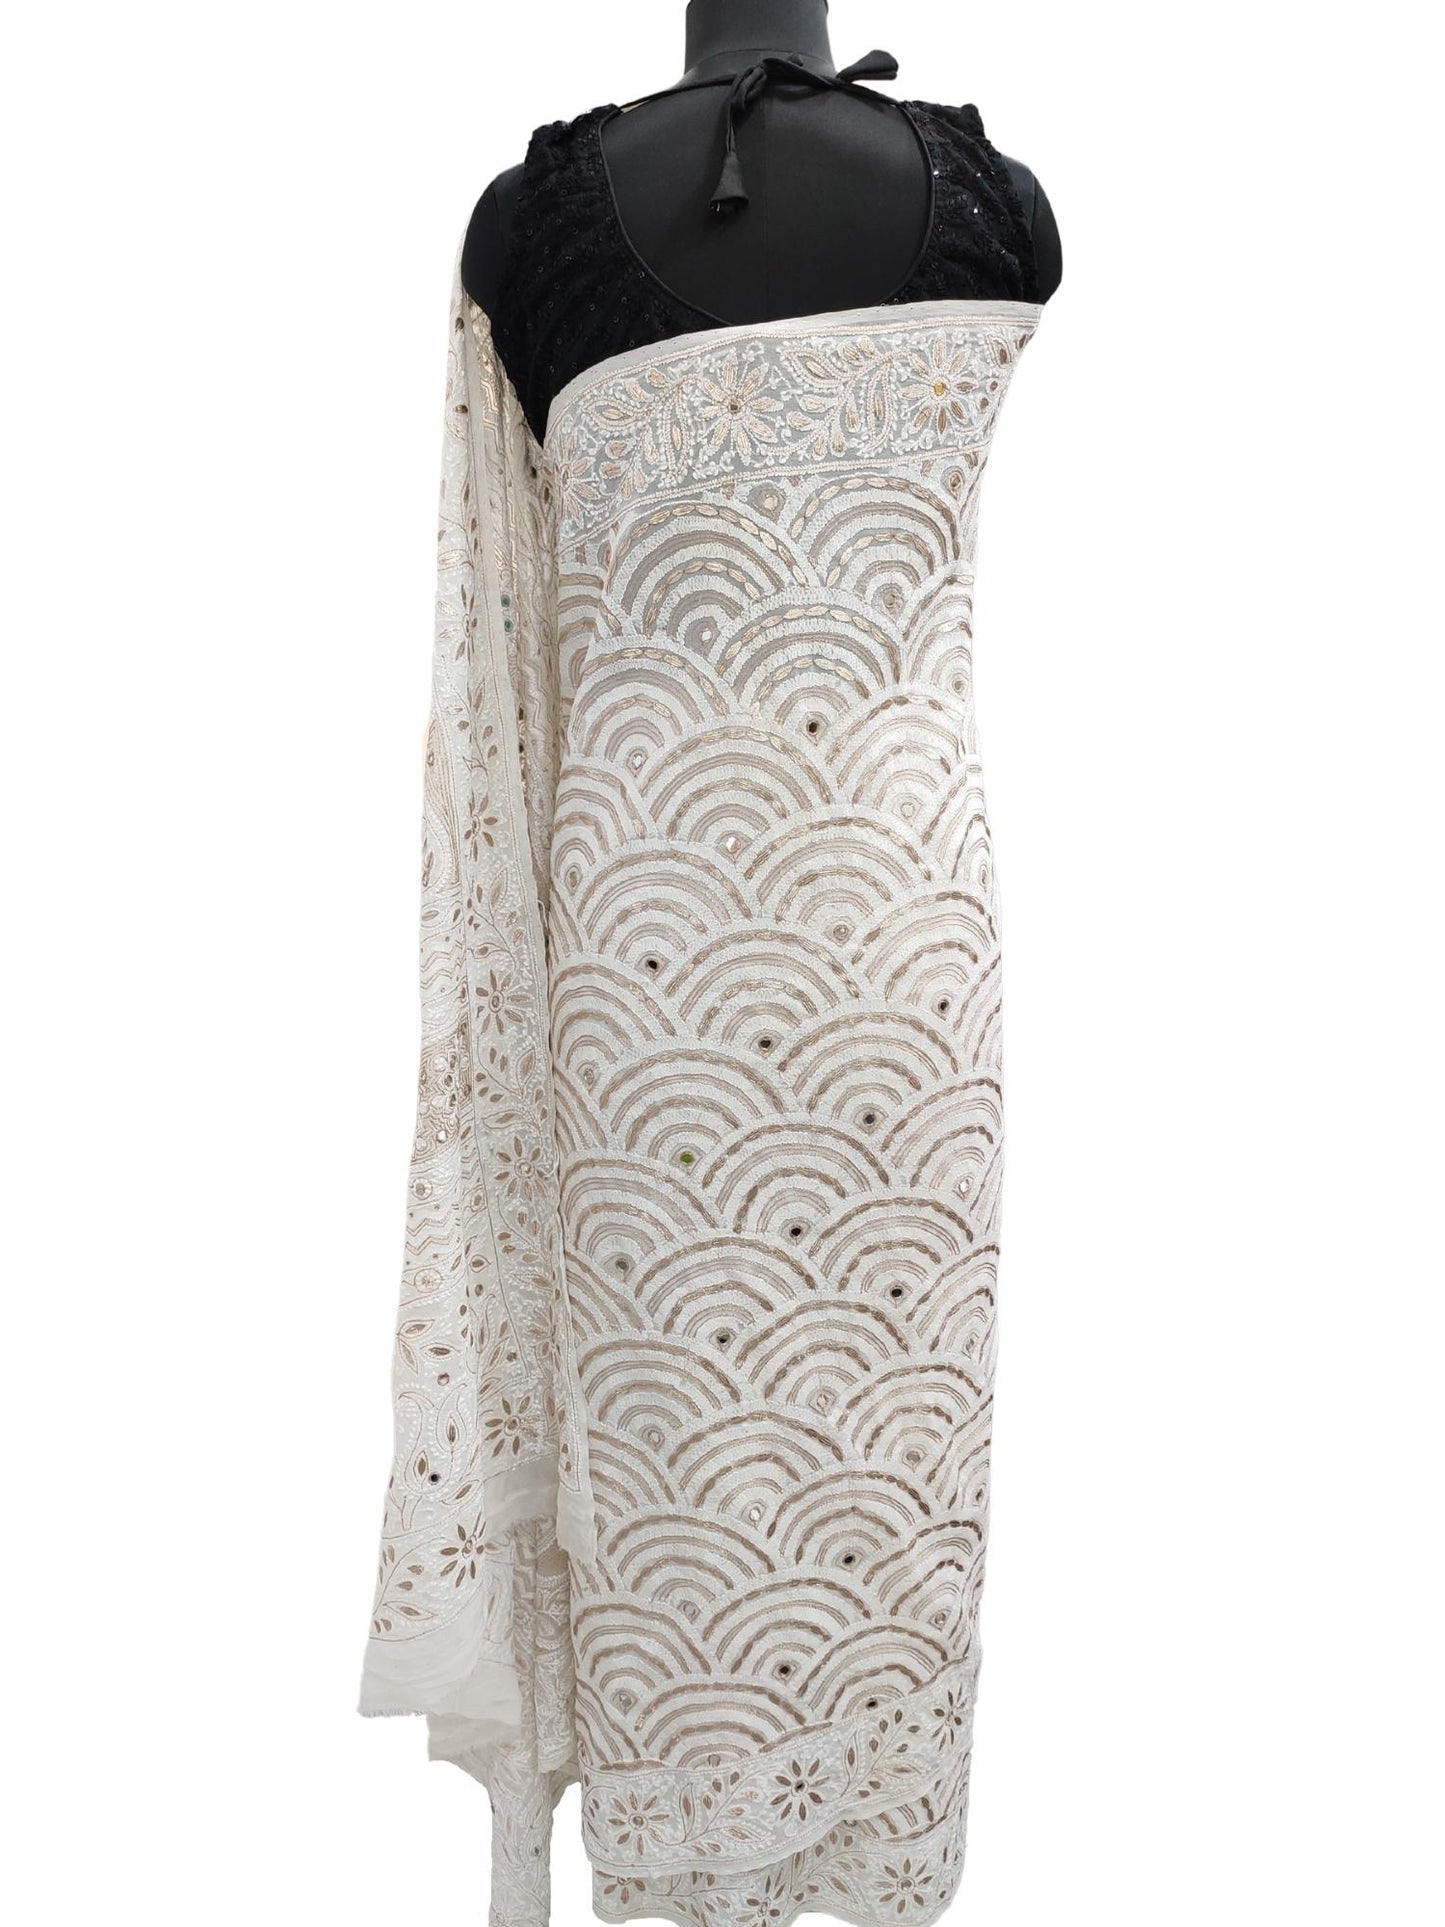 Shyamal Chikan Hand Embroidered White Pure Georgette Lucknowi Chikankari Saree With Blouse Piece, Gotta Patti and Mirror Work - S13585